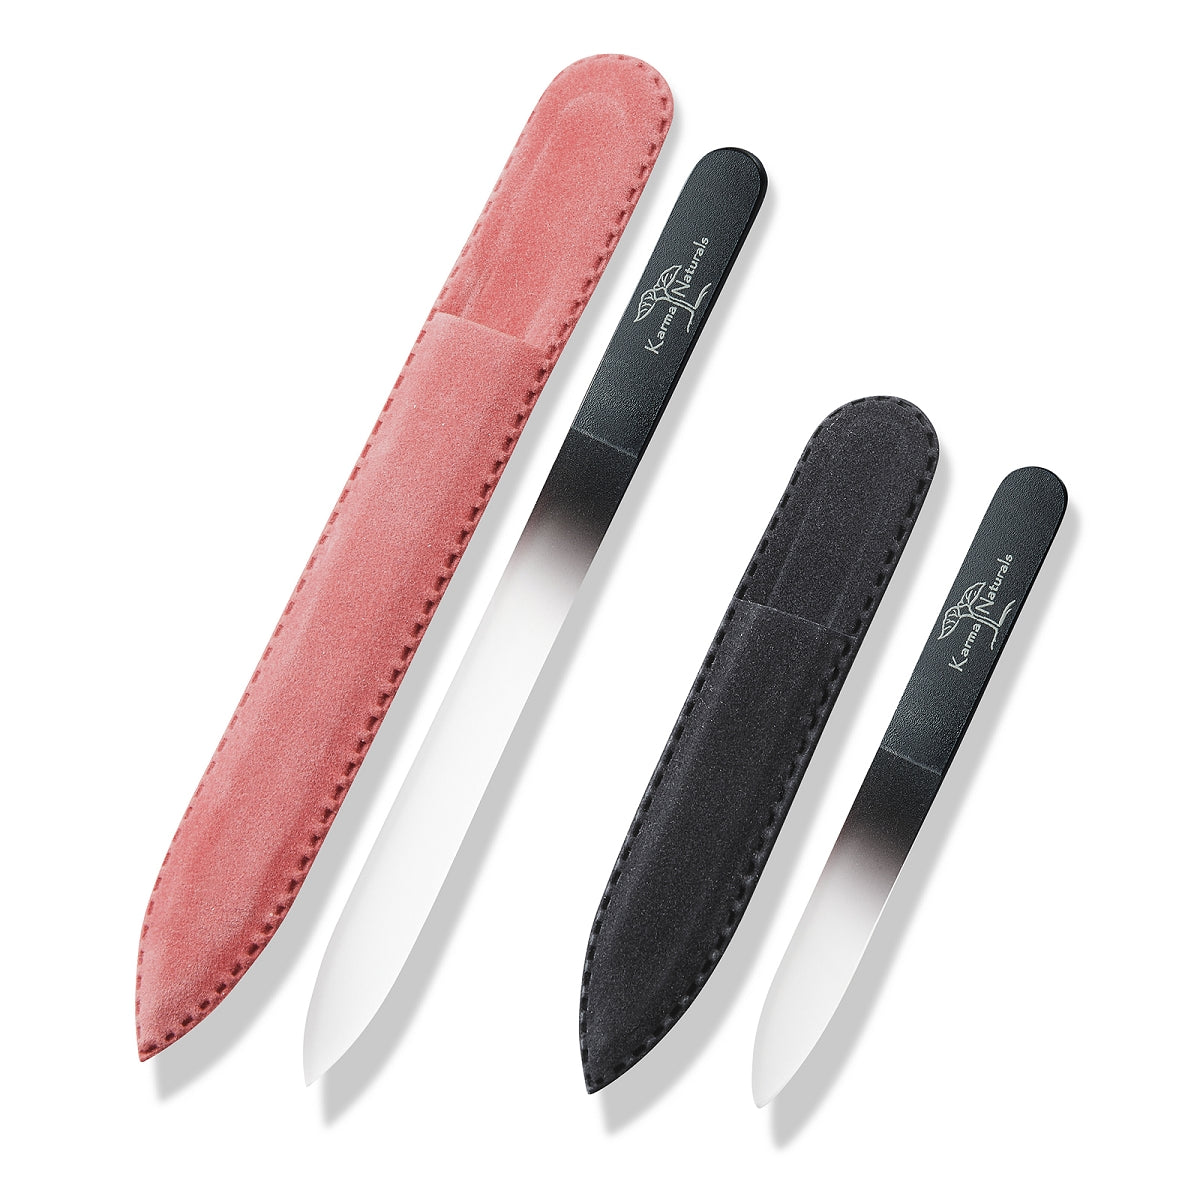 Karma Naturals Set of 2 Glass Nail Files; in Blue and Pink Velvet Pouches